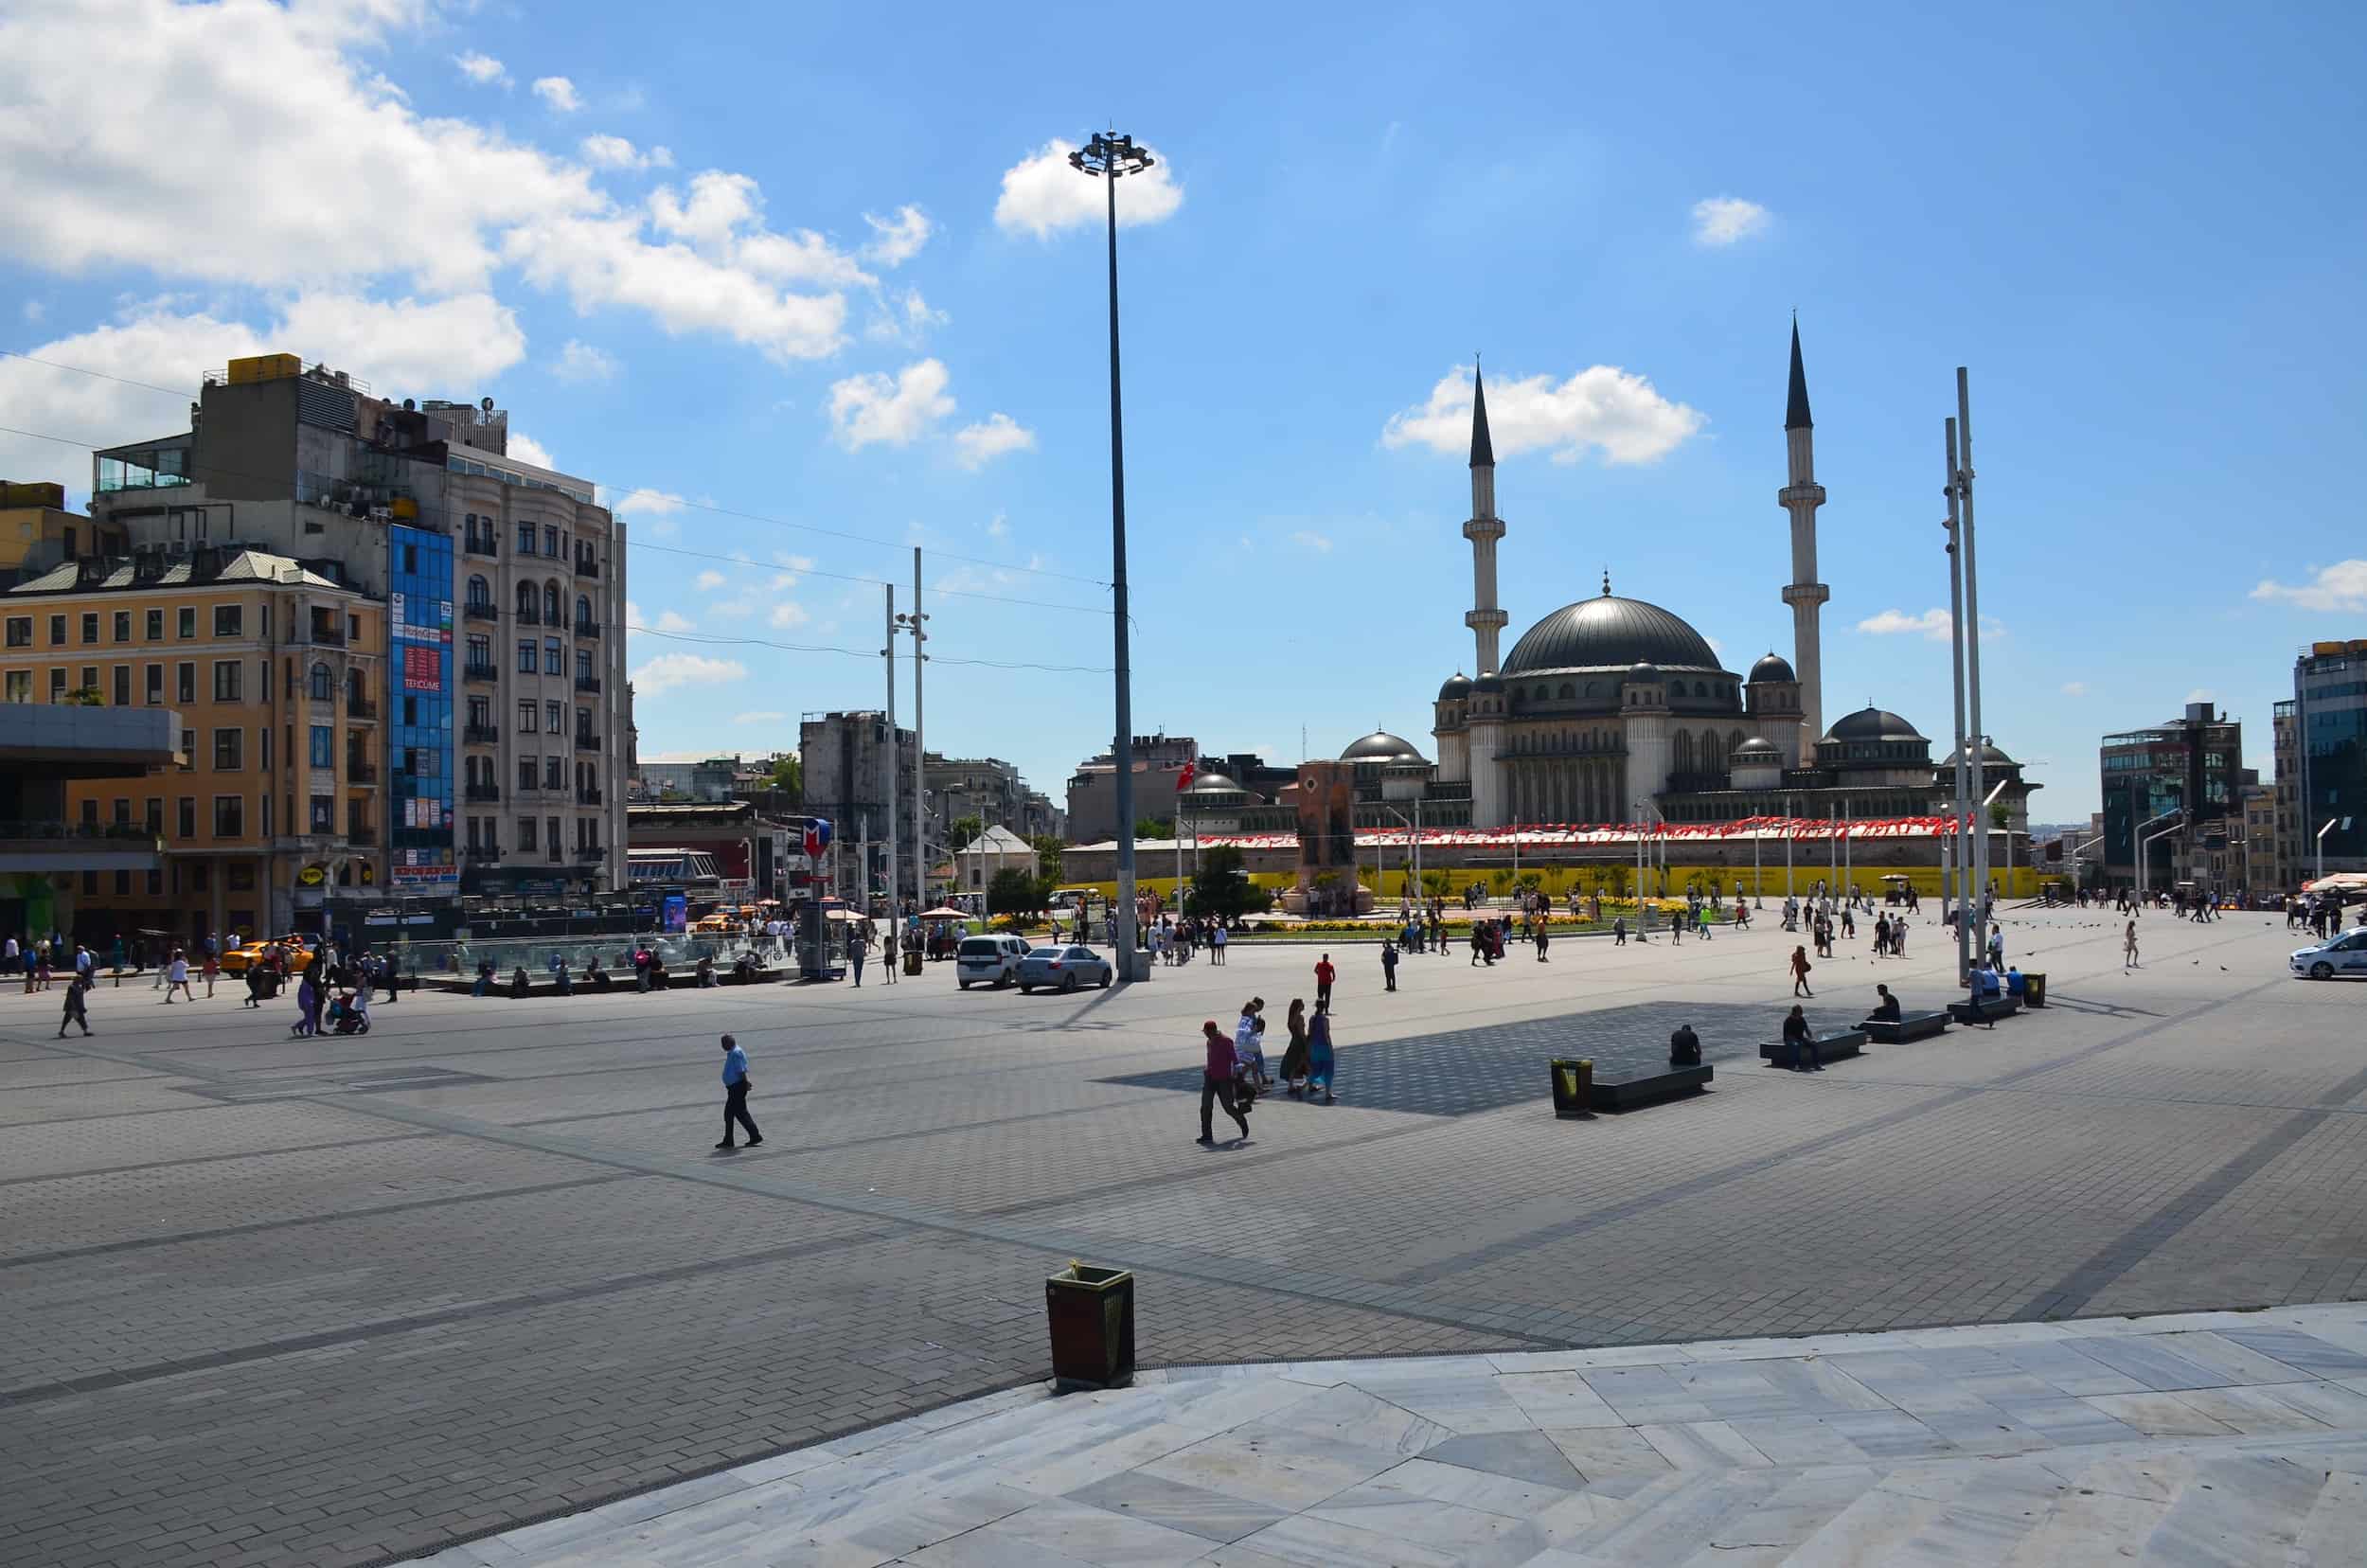 Taksim Square in May 2022 in Istanbul, Turkey